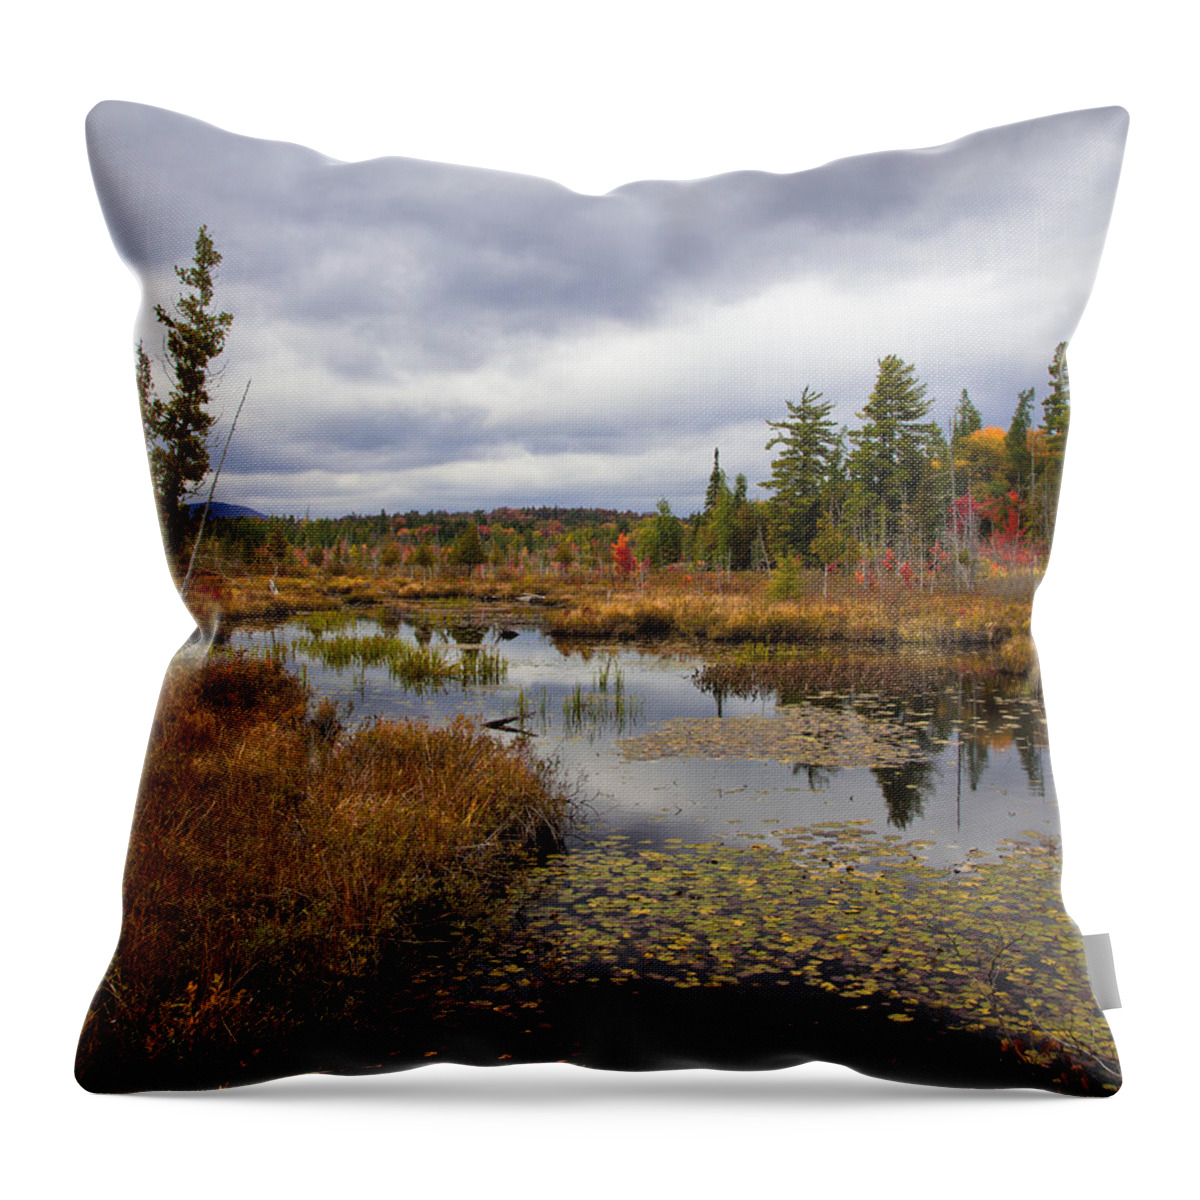 The Ponds Near Raquette Lake Throw Pillow featuring the photograph The Ponds near Raquette Lake by David Patterson